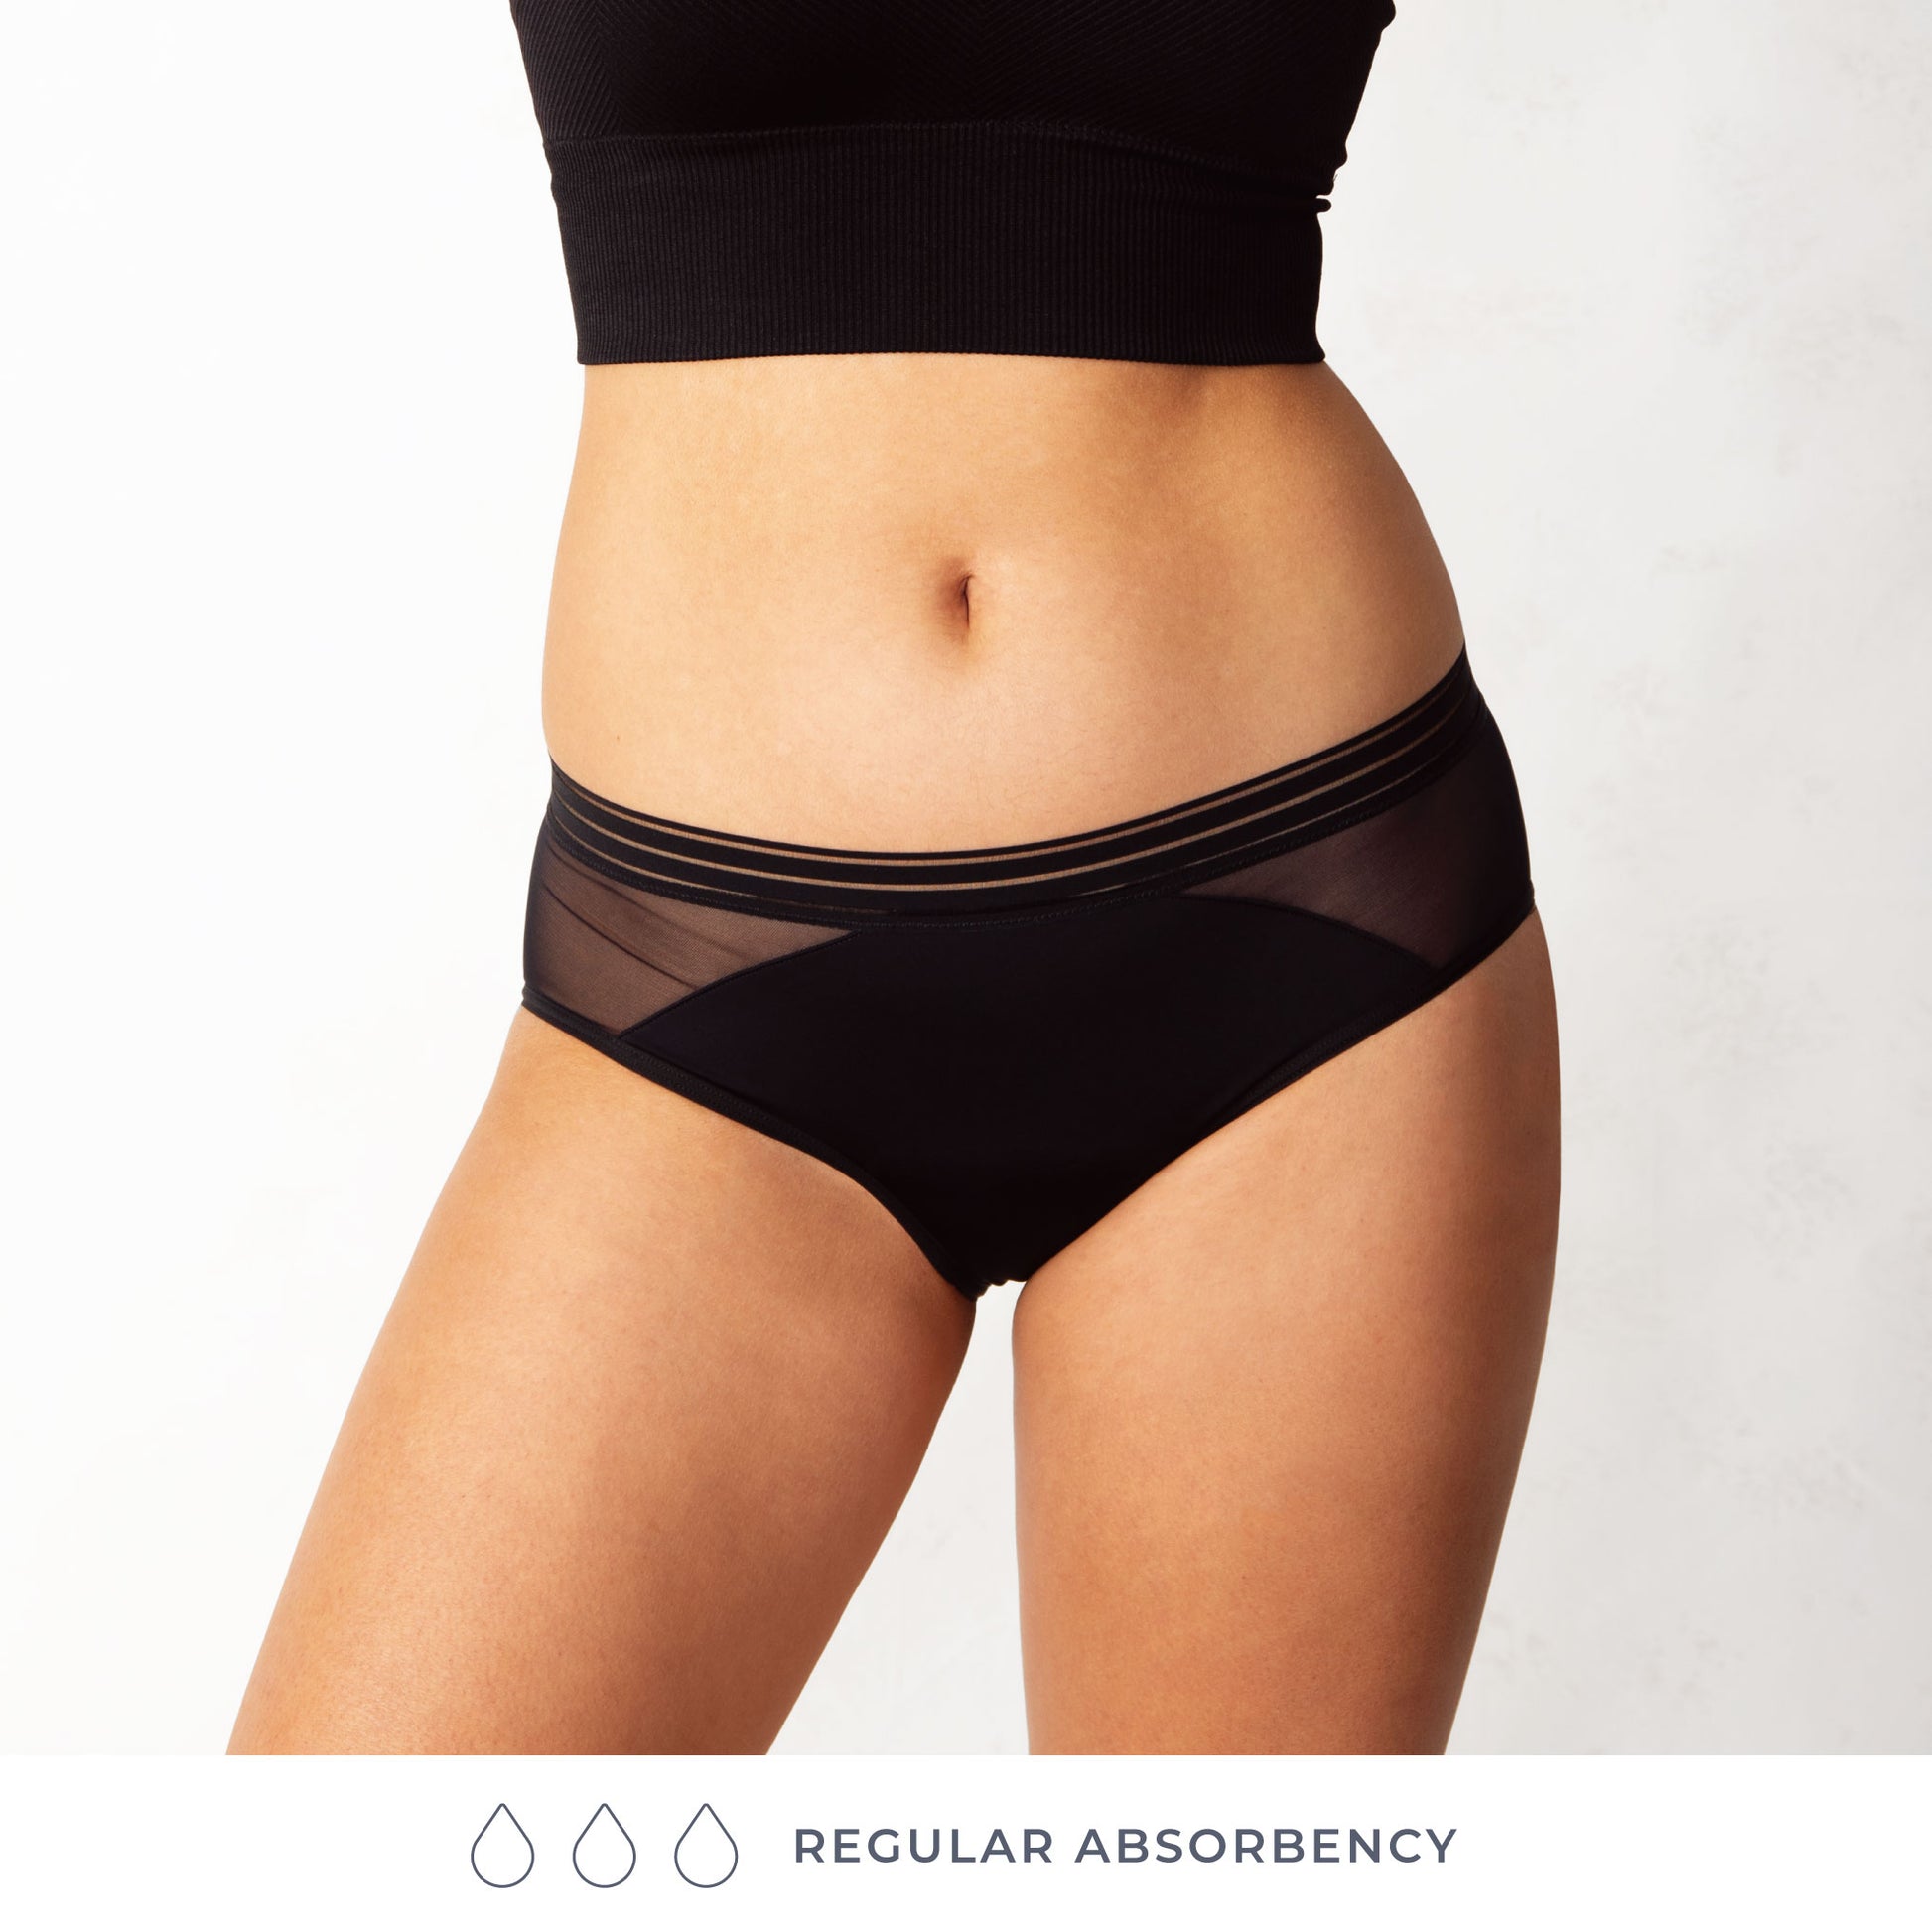 saalt Reusable Period Underwear - Comfortable, Thin, and Keeps You Dry from  All Leaks (Mesh Hipster)